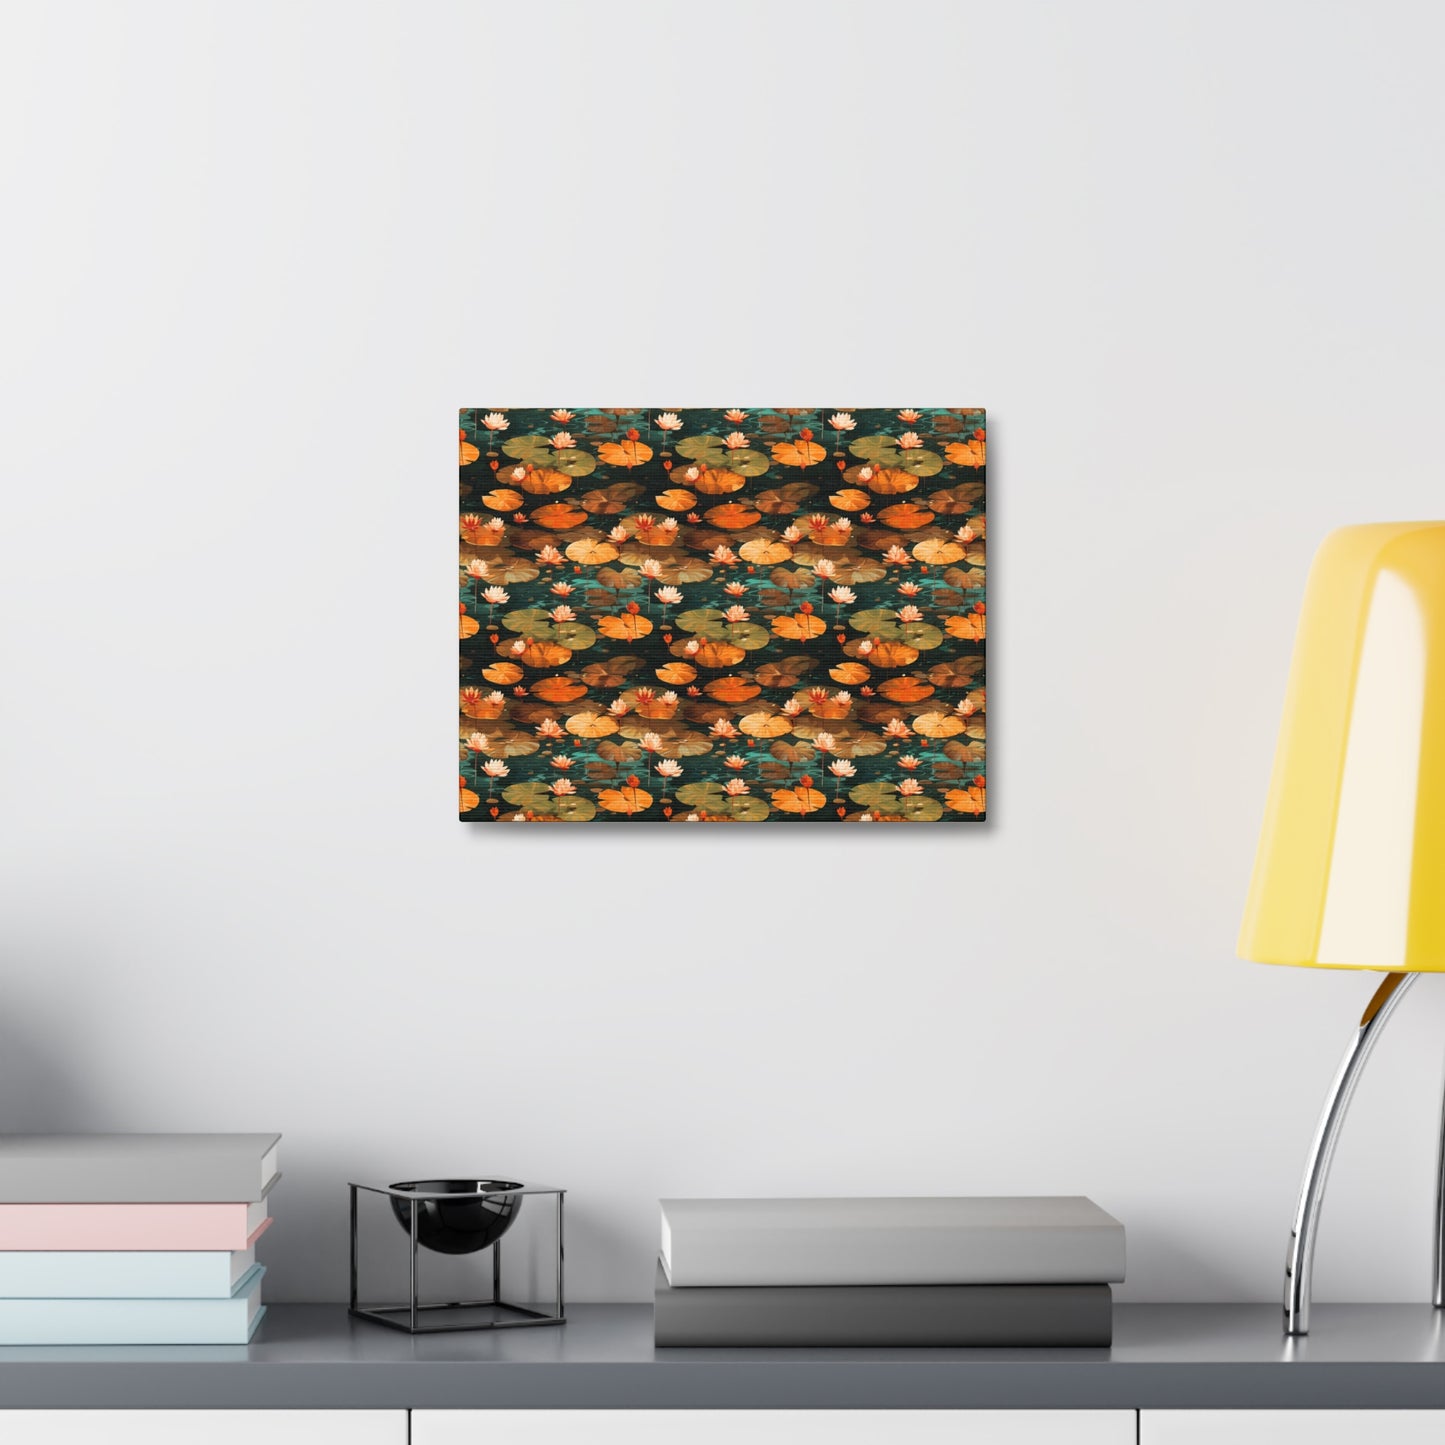 Orange Lotus Whisper: Autumn on the Water - Satin Canvas, Stretched